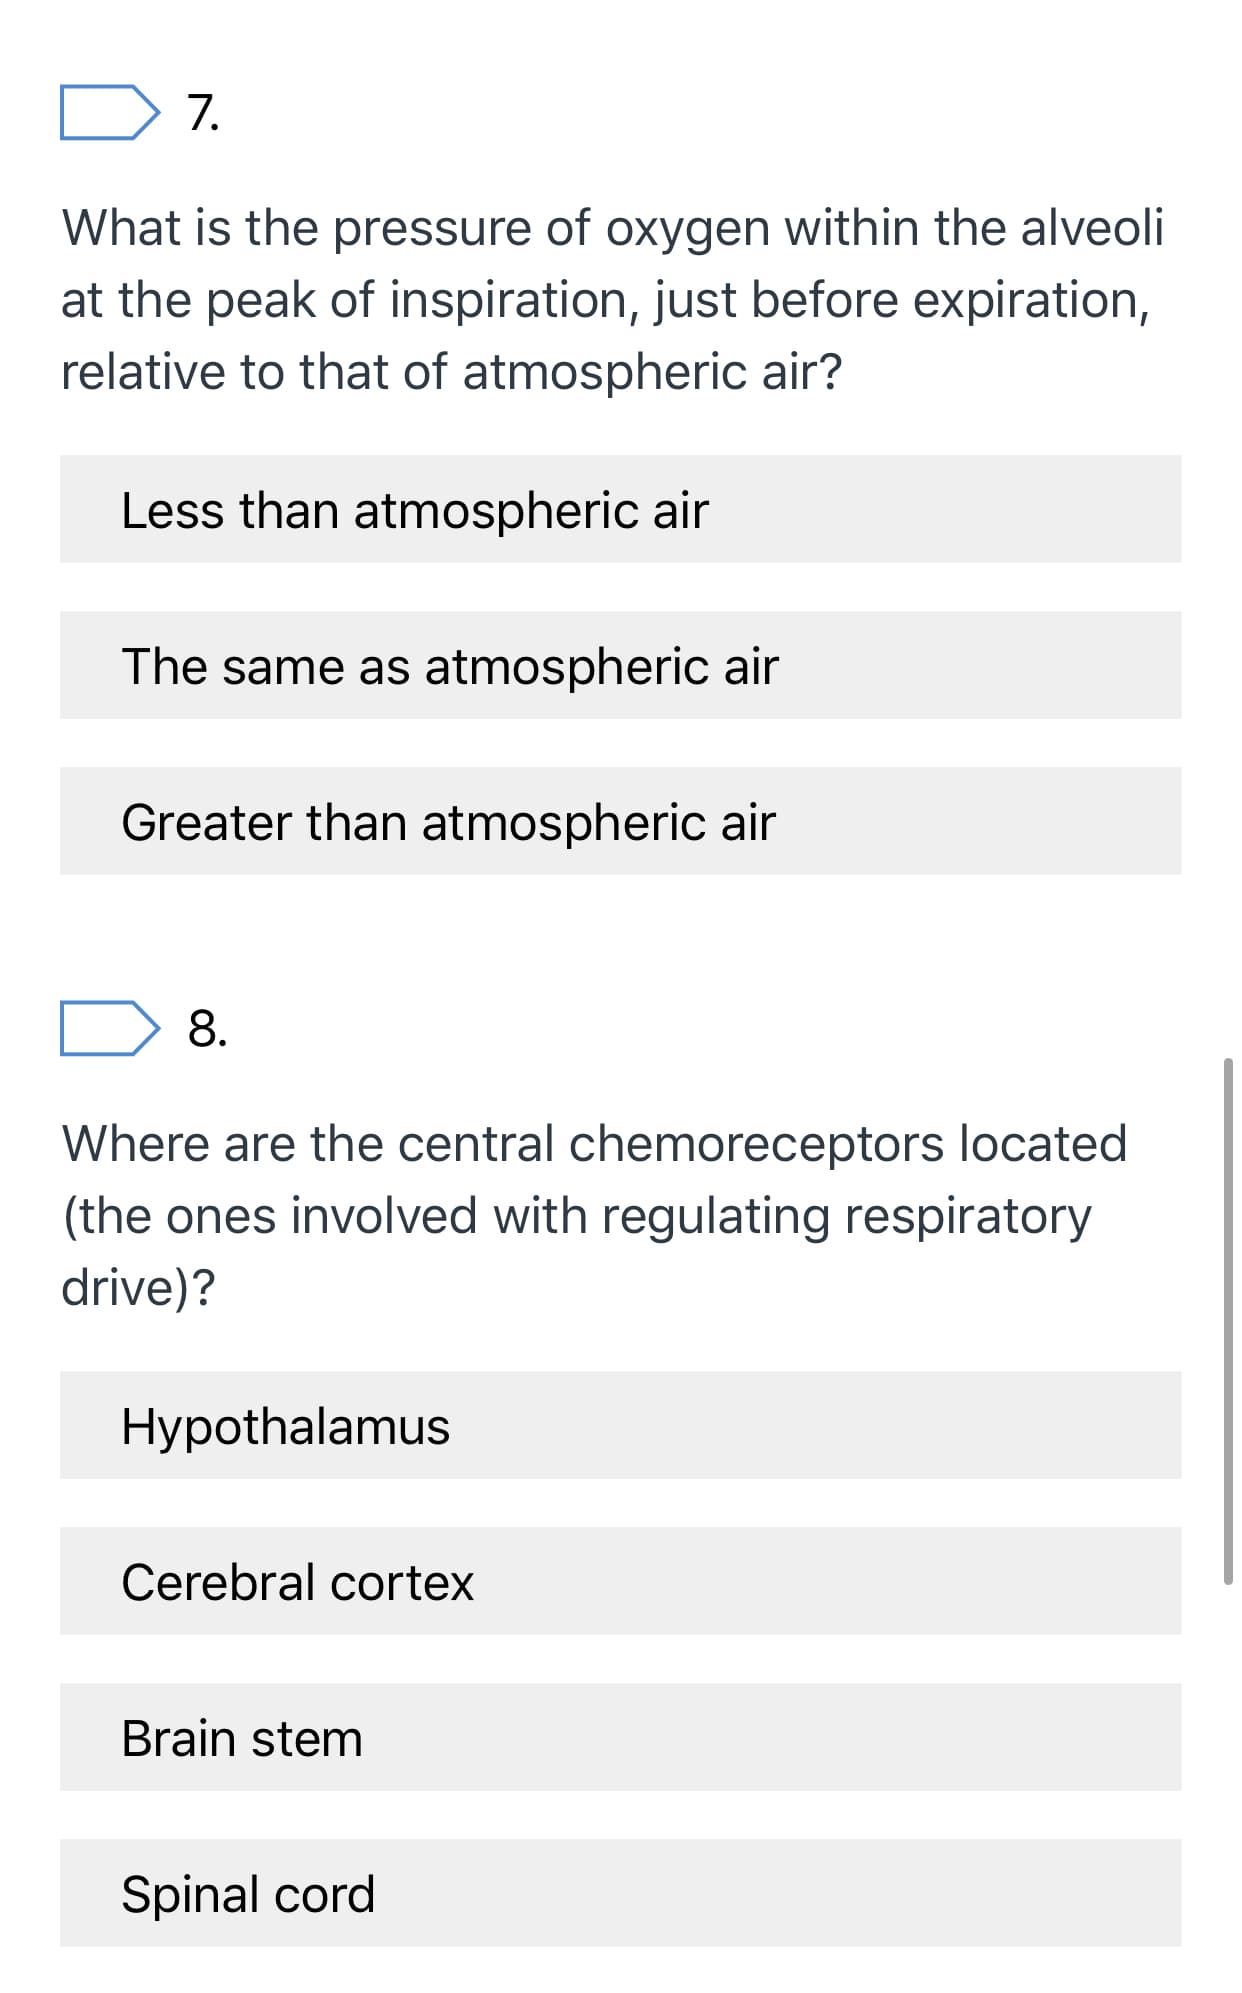 7.
What is the pressure of oxygen within the alveoli
at the peak of inspiration, just before expiration,
relative to that of atmospheric air?
Less than atmospheric air
The same as atmospheric air
Greater than atmospheric air
8.
Where are the central chemoreceptors located
(the ones involved with regulating respiratory
drive)?
Hypothalamus
Cerebral cortex
Brain stem
Spinal cord
